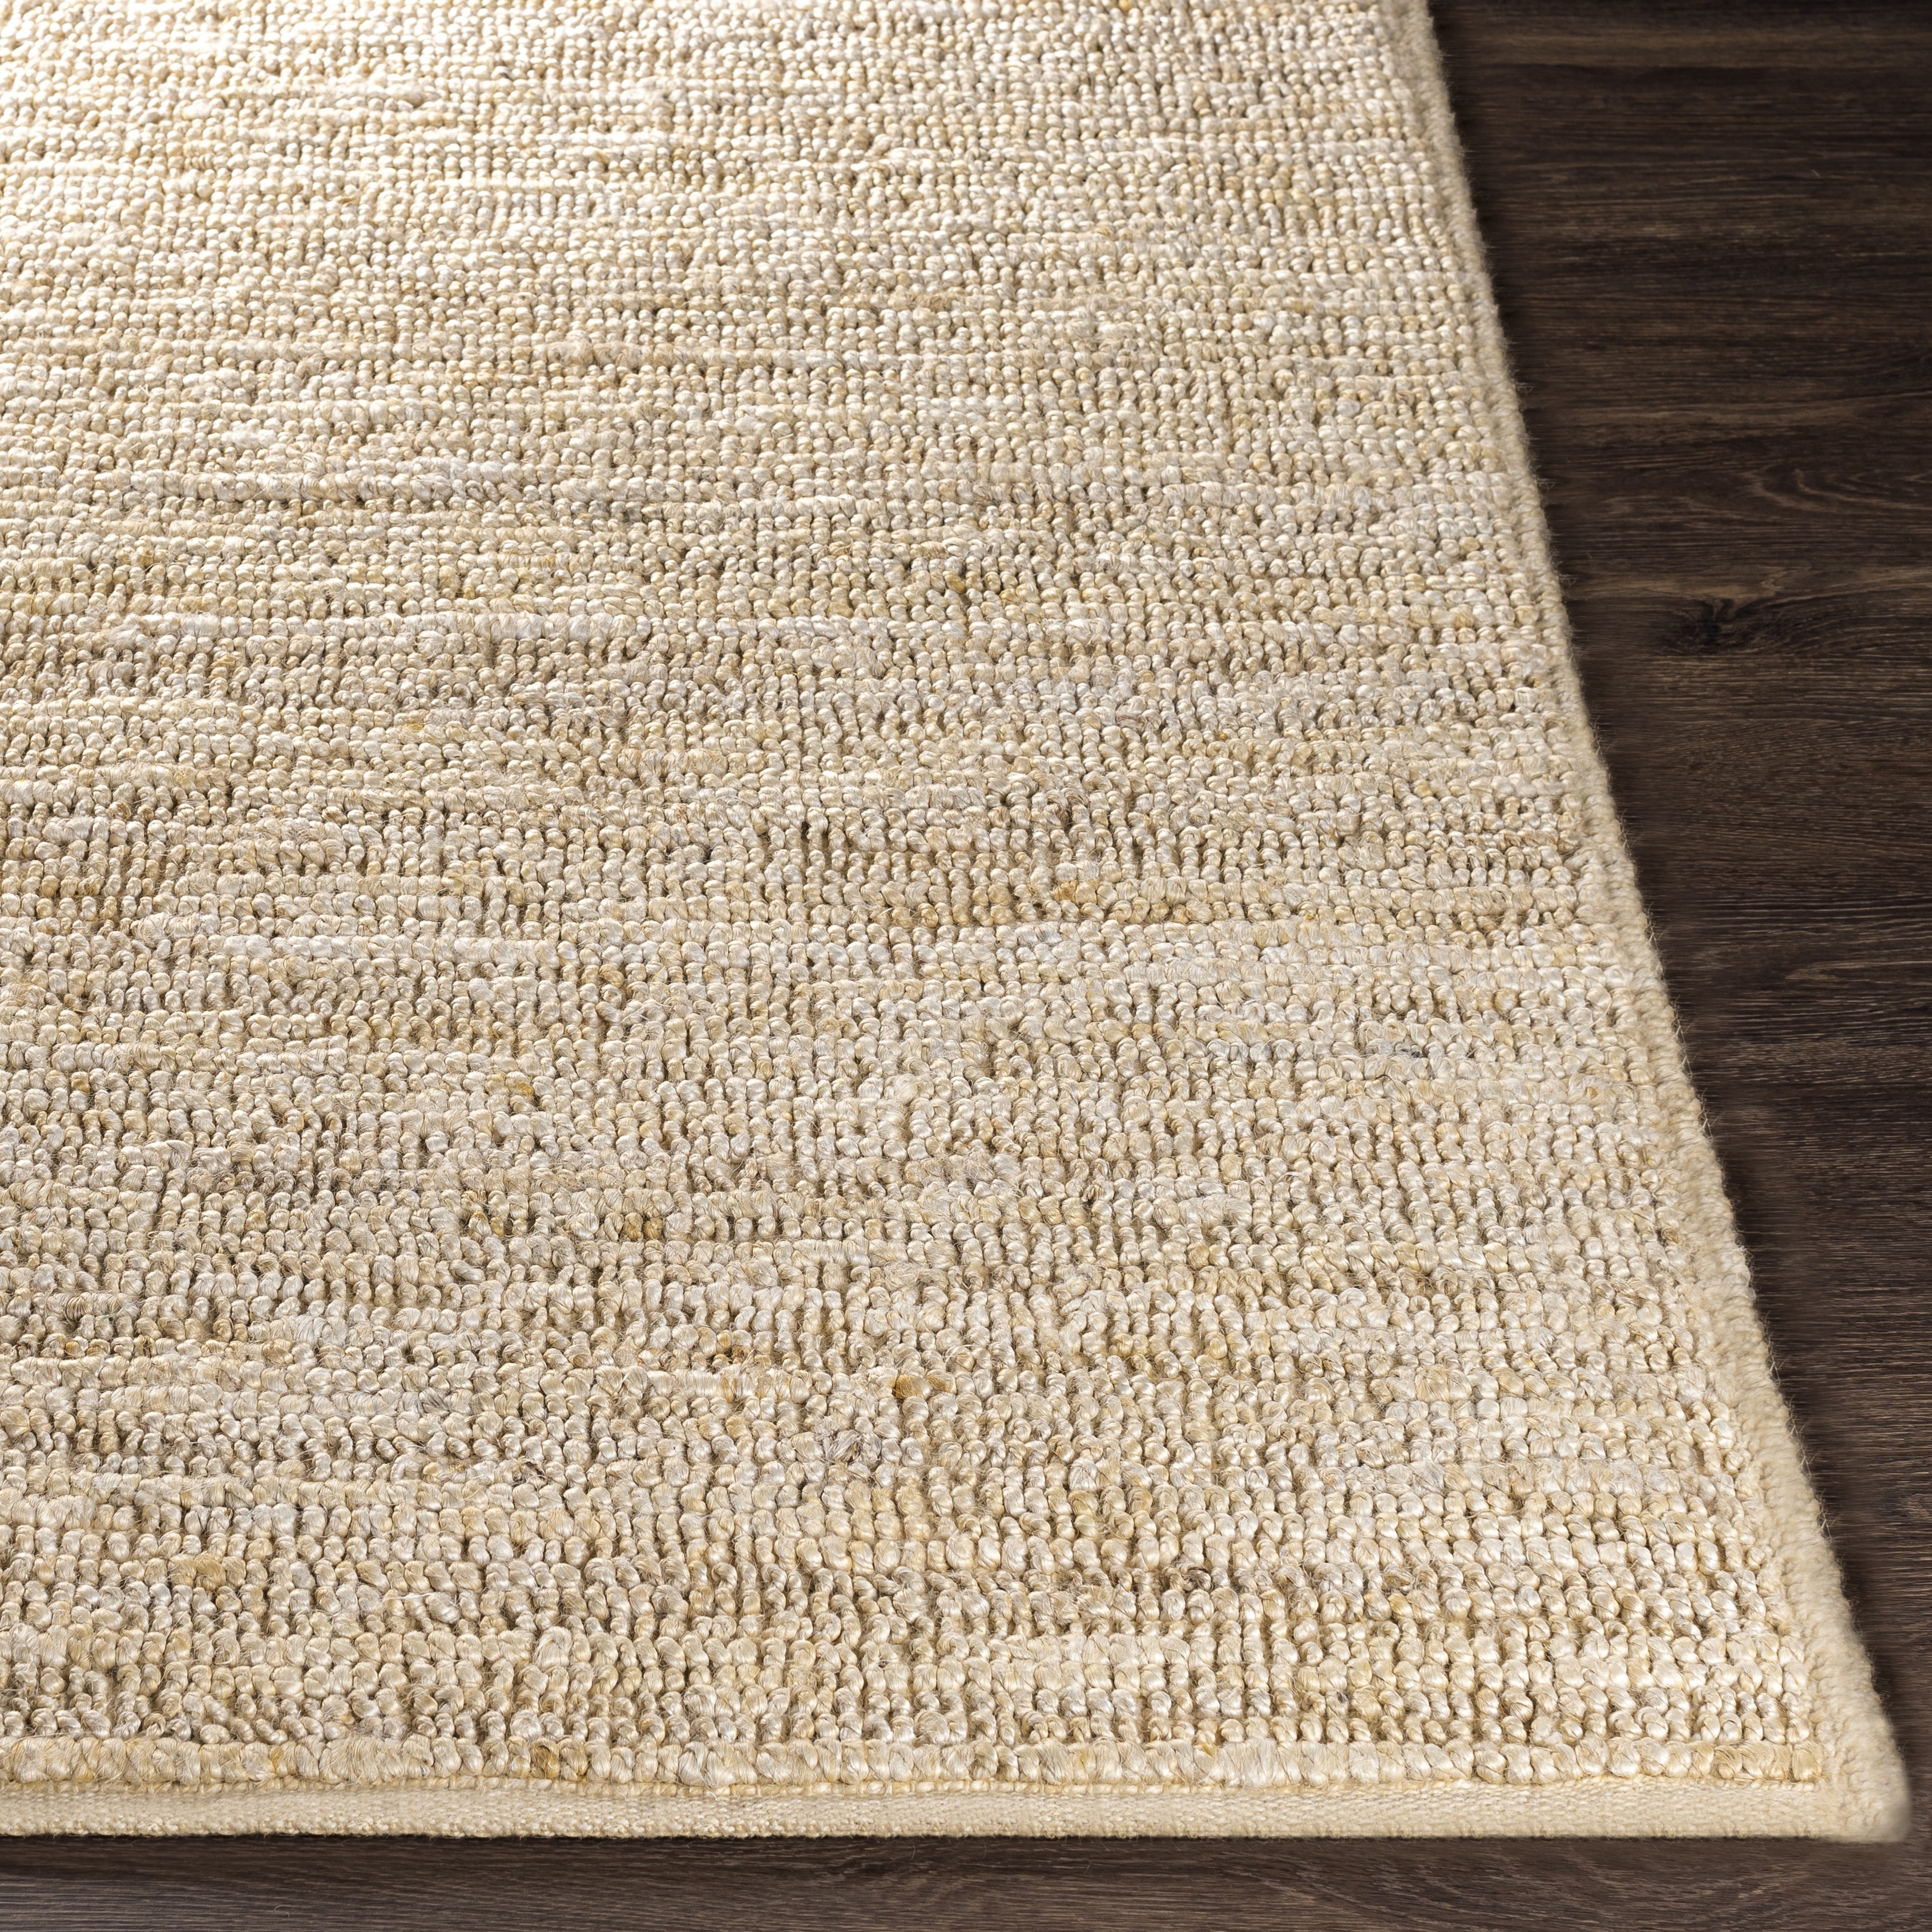 Continental Rug, 10' x 14' - Image 2